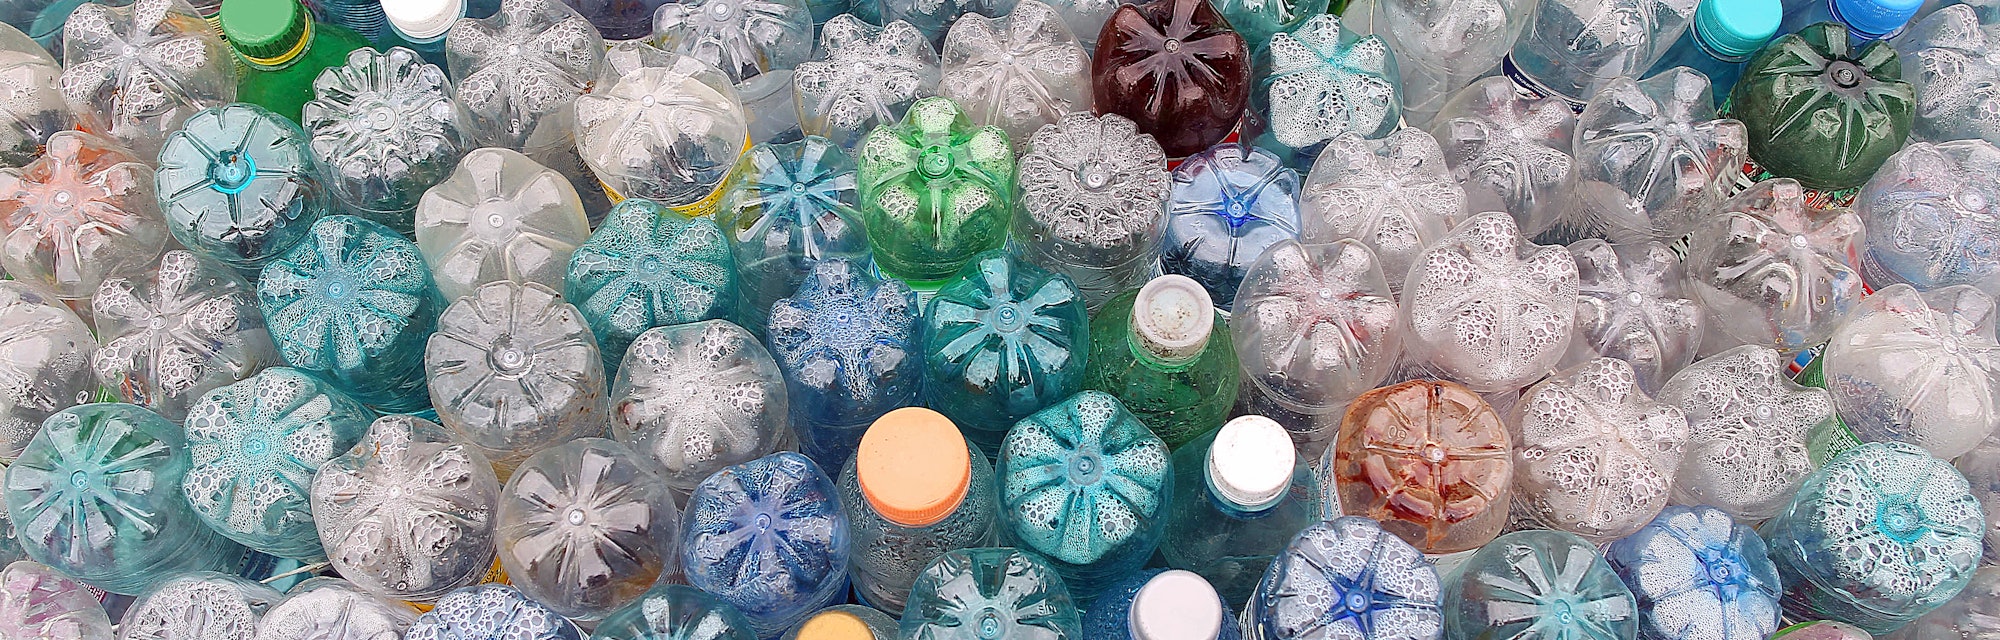 Dirty used colored plastic bottle pile ready to be recycled